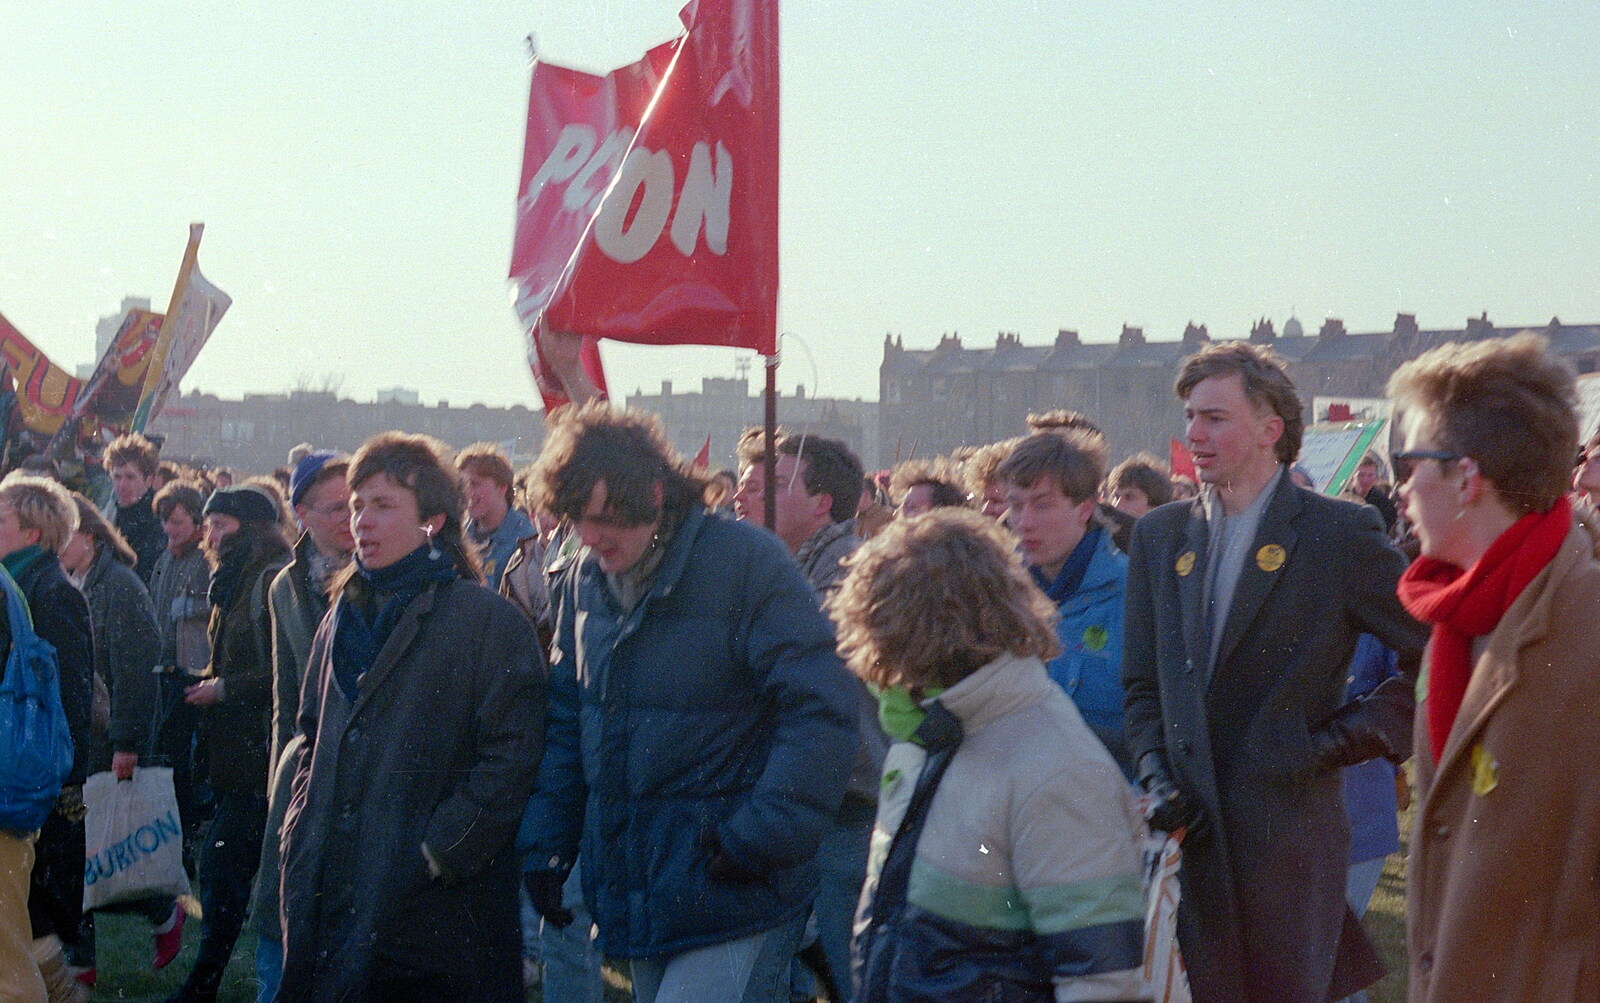 In what is possibly Kennington Park from Uni: No Chance Fowler! A student Demonstration, London - 26th February 1986